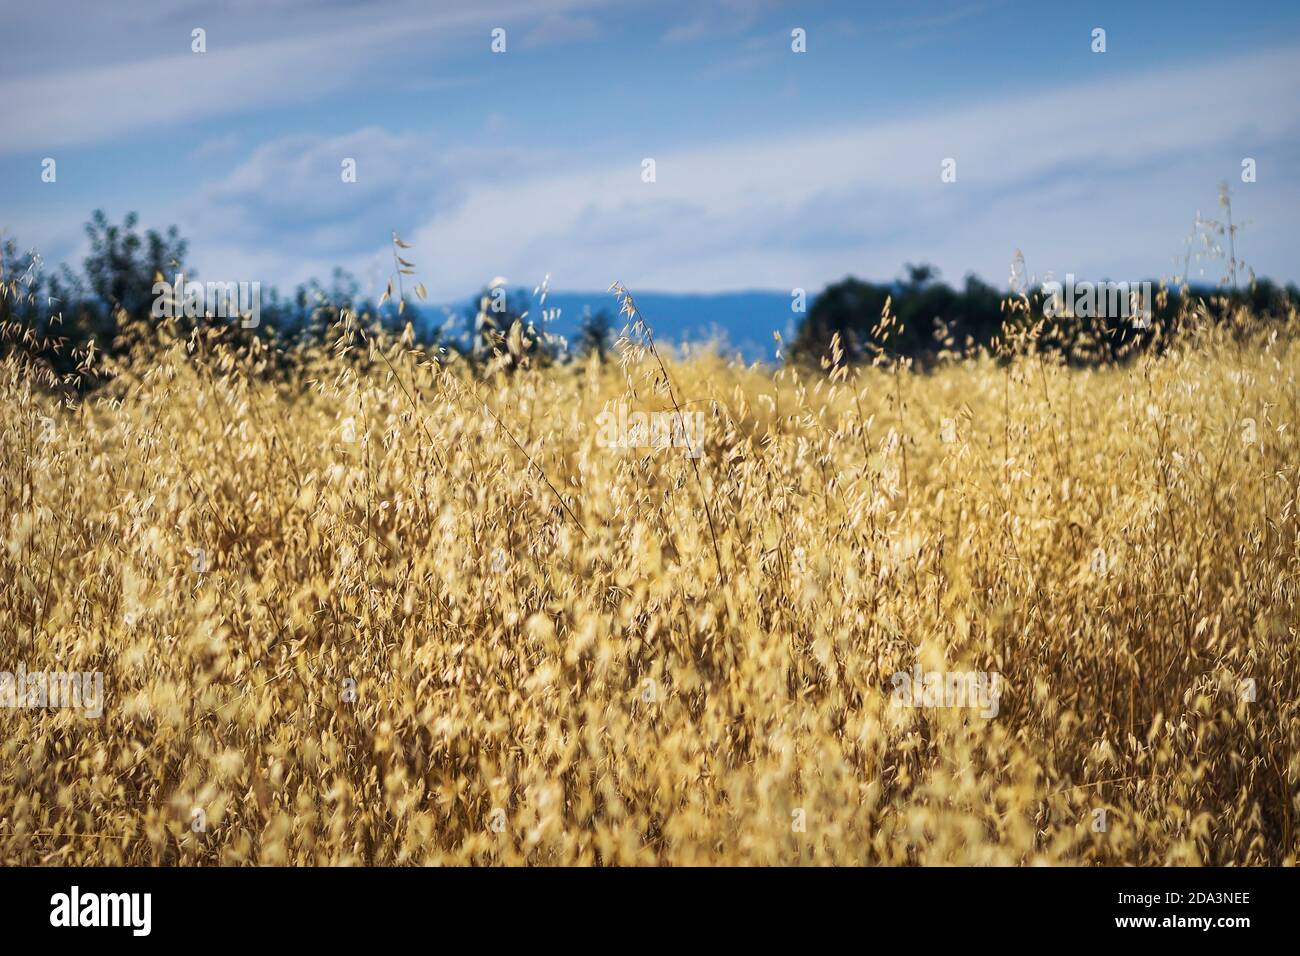 Field of oats in front of a blue sky on a sunny day. Stock Photo